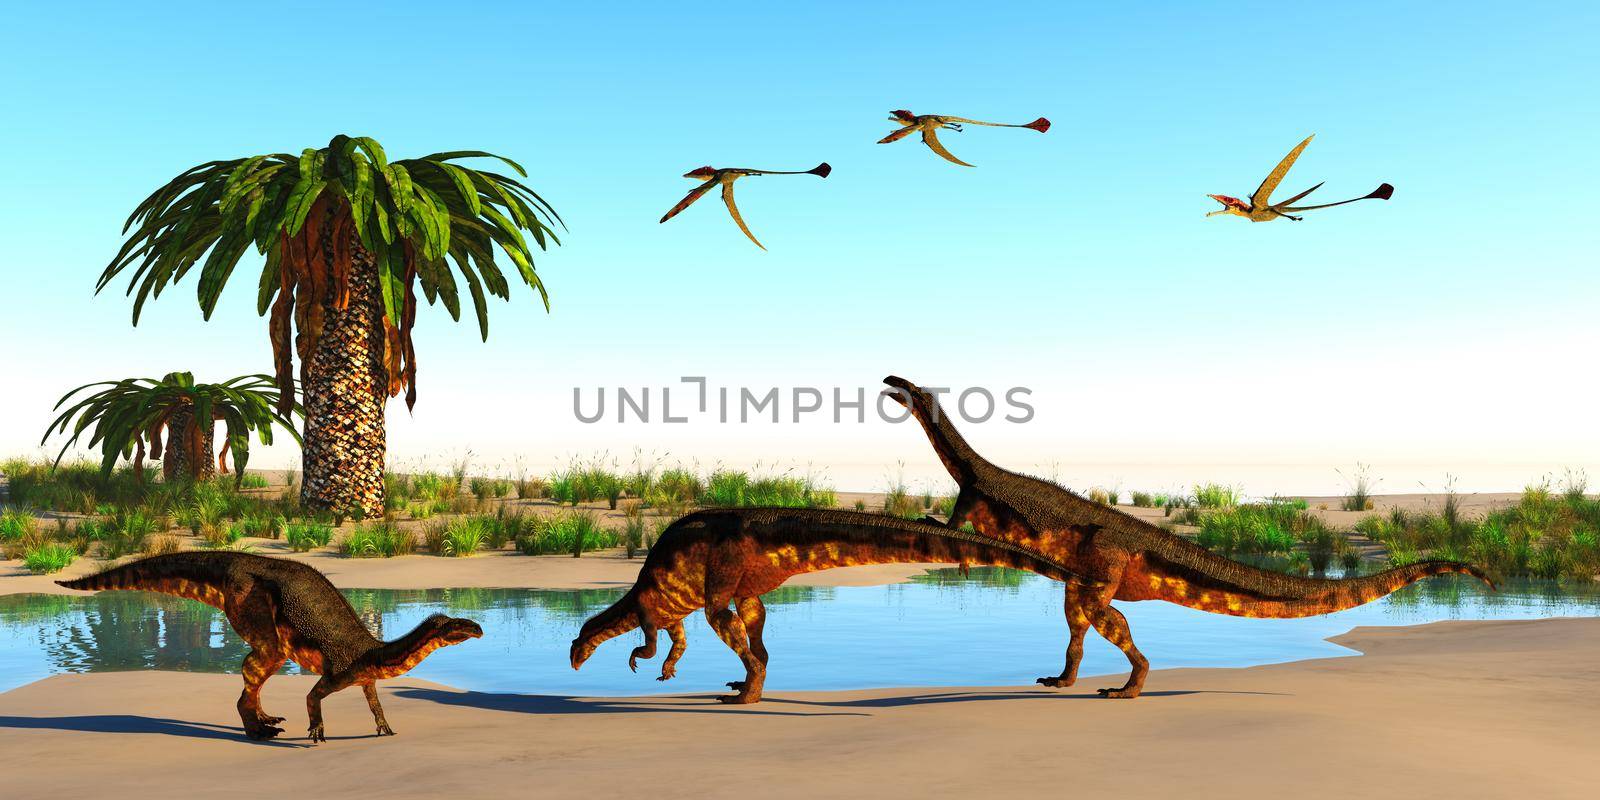 Plateosaurus dinosaurs, Eudimorphodon reptiles and Bjuvia trees surround a watering hole during the Triassic period.